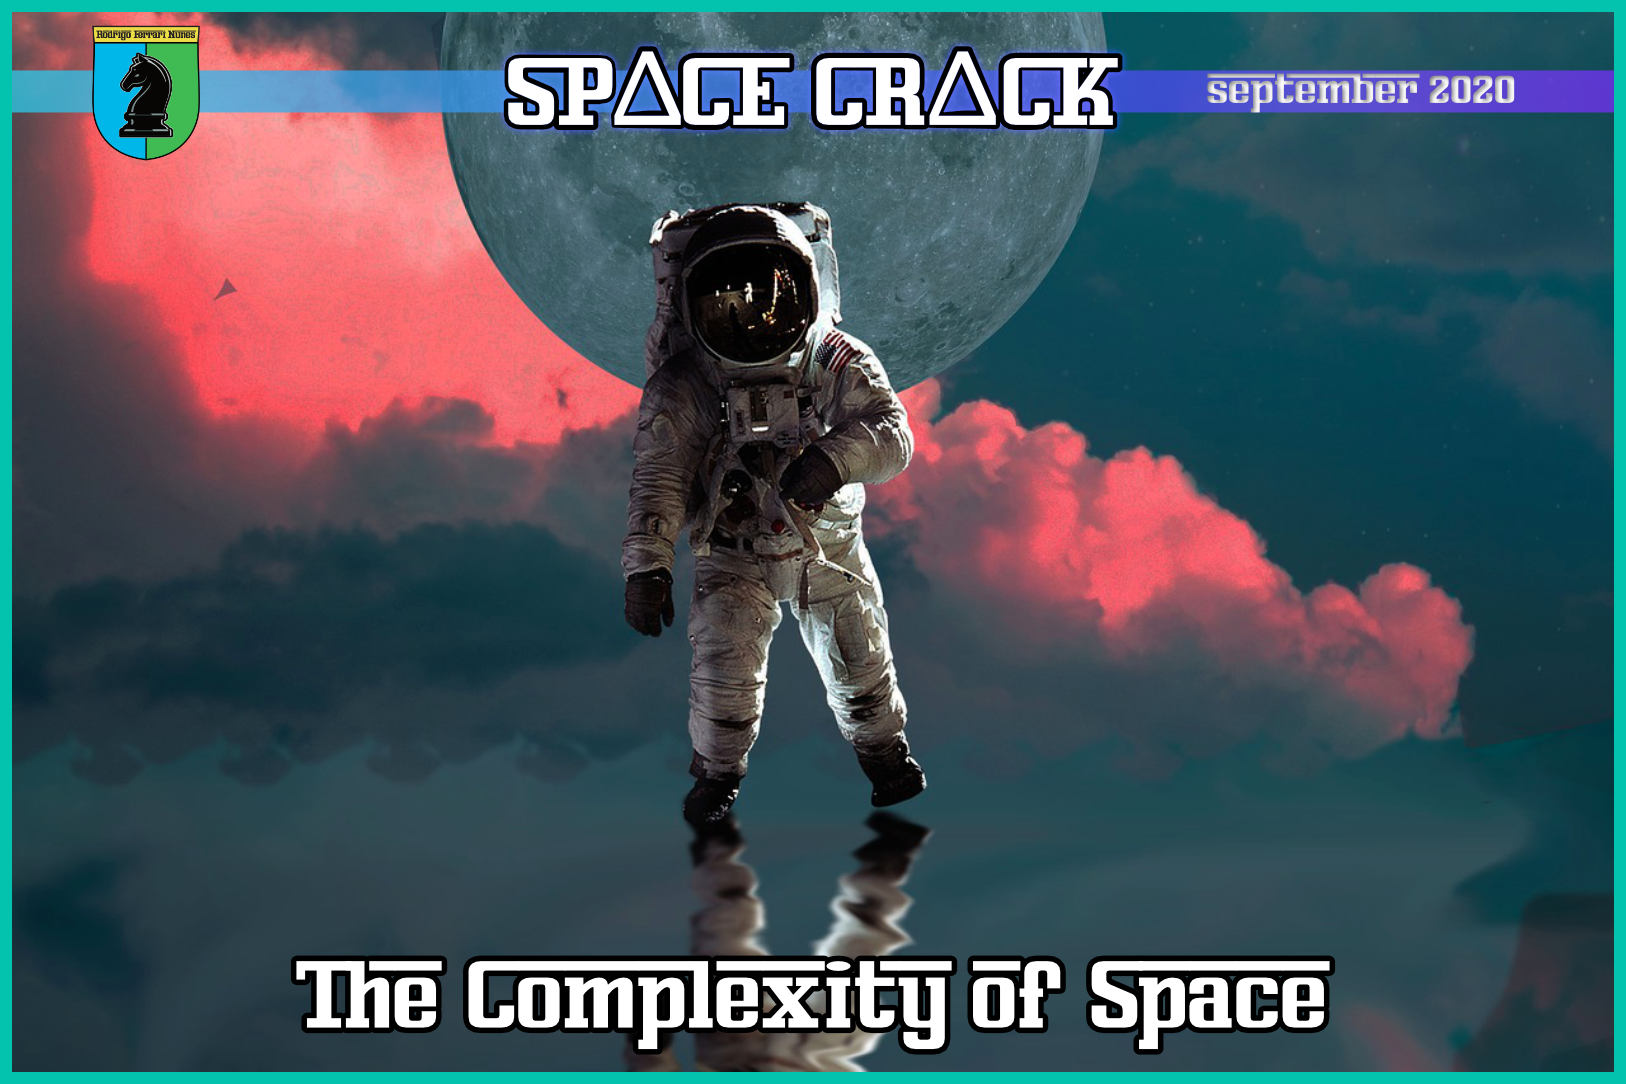 THE COMPLEXITY OF SPACE